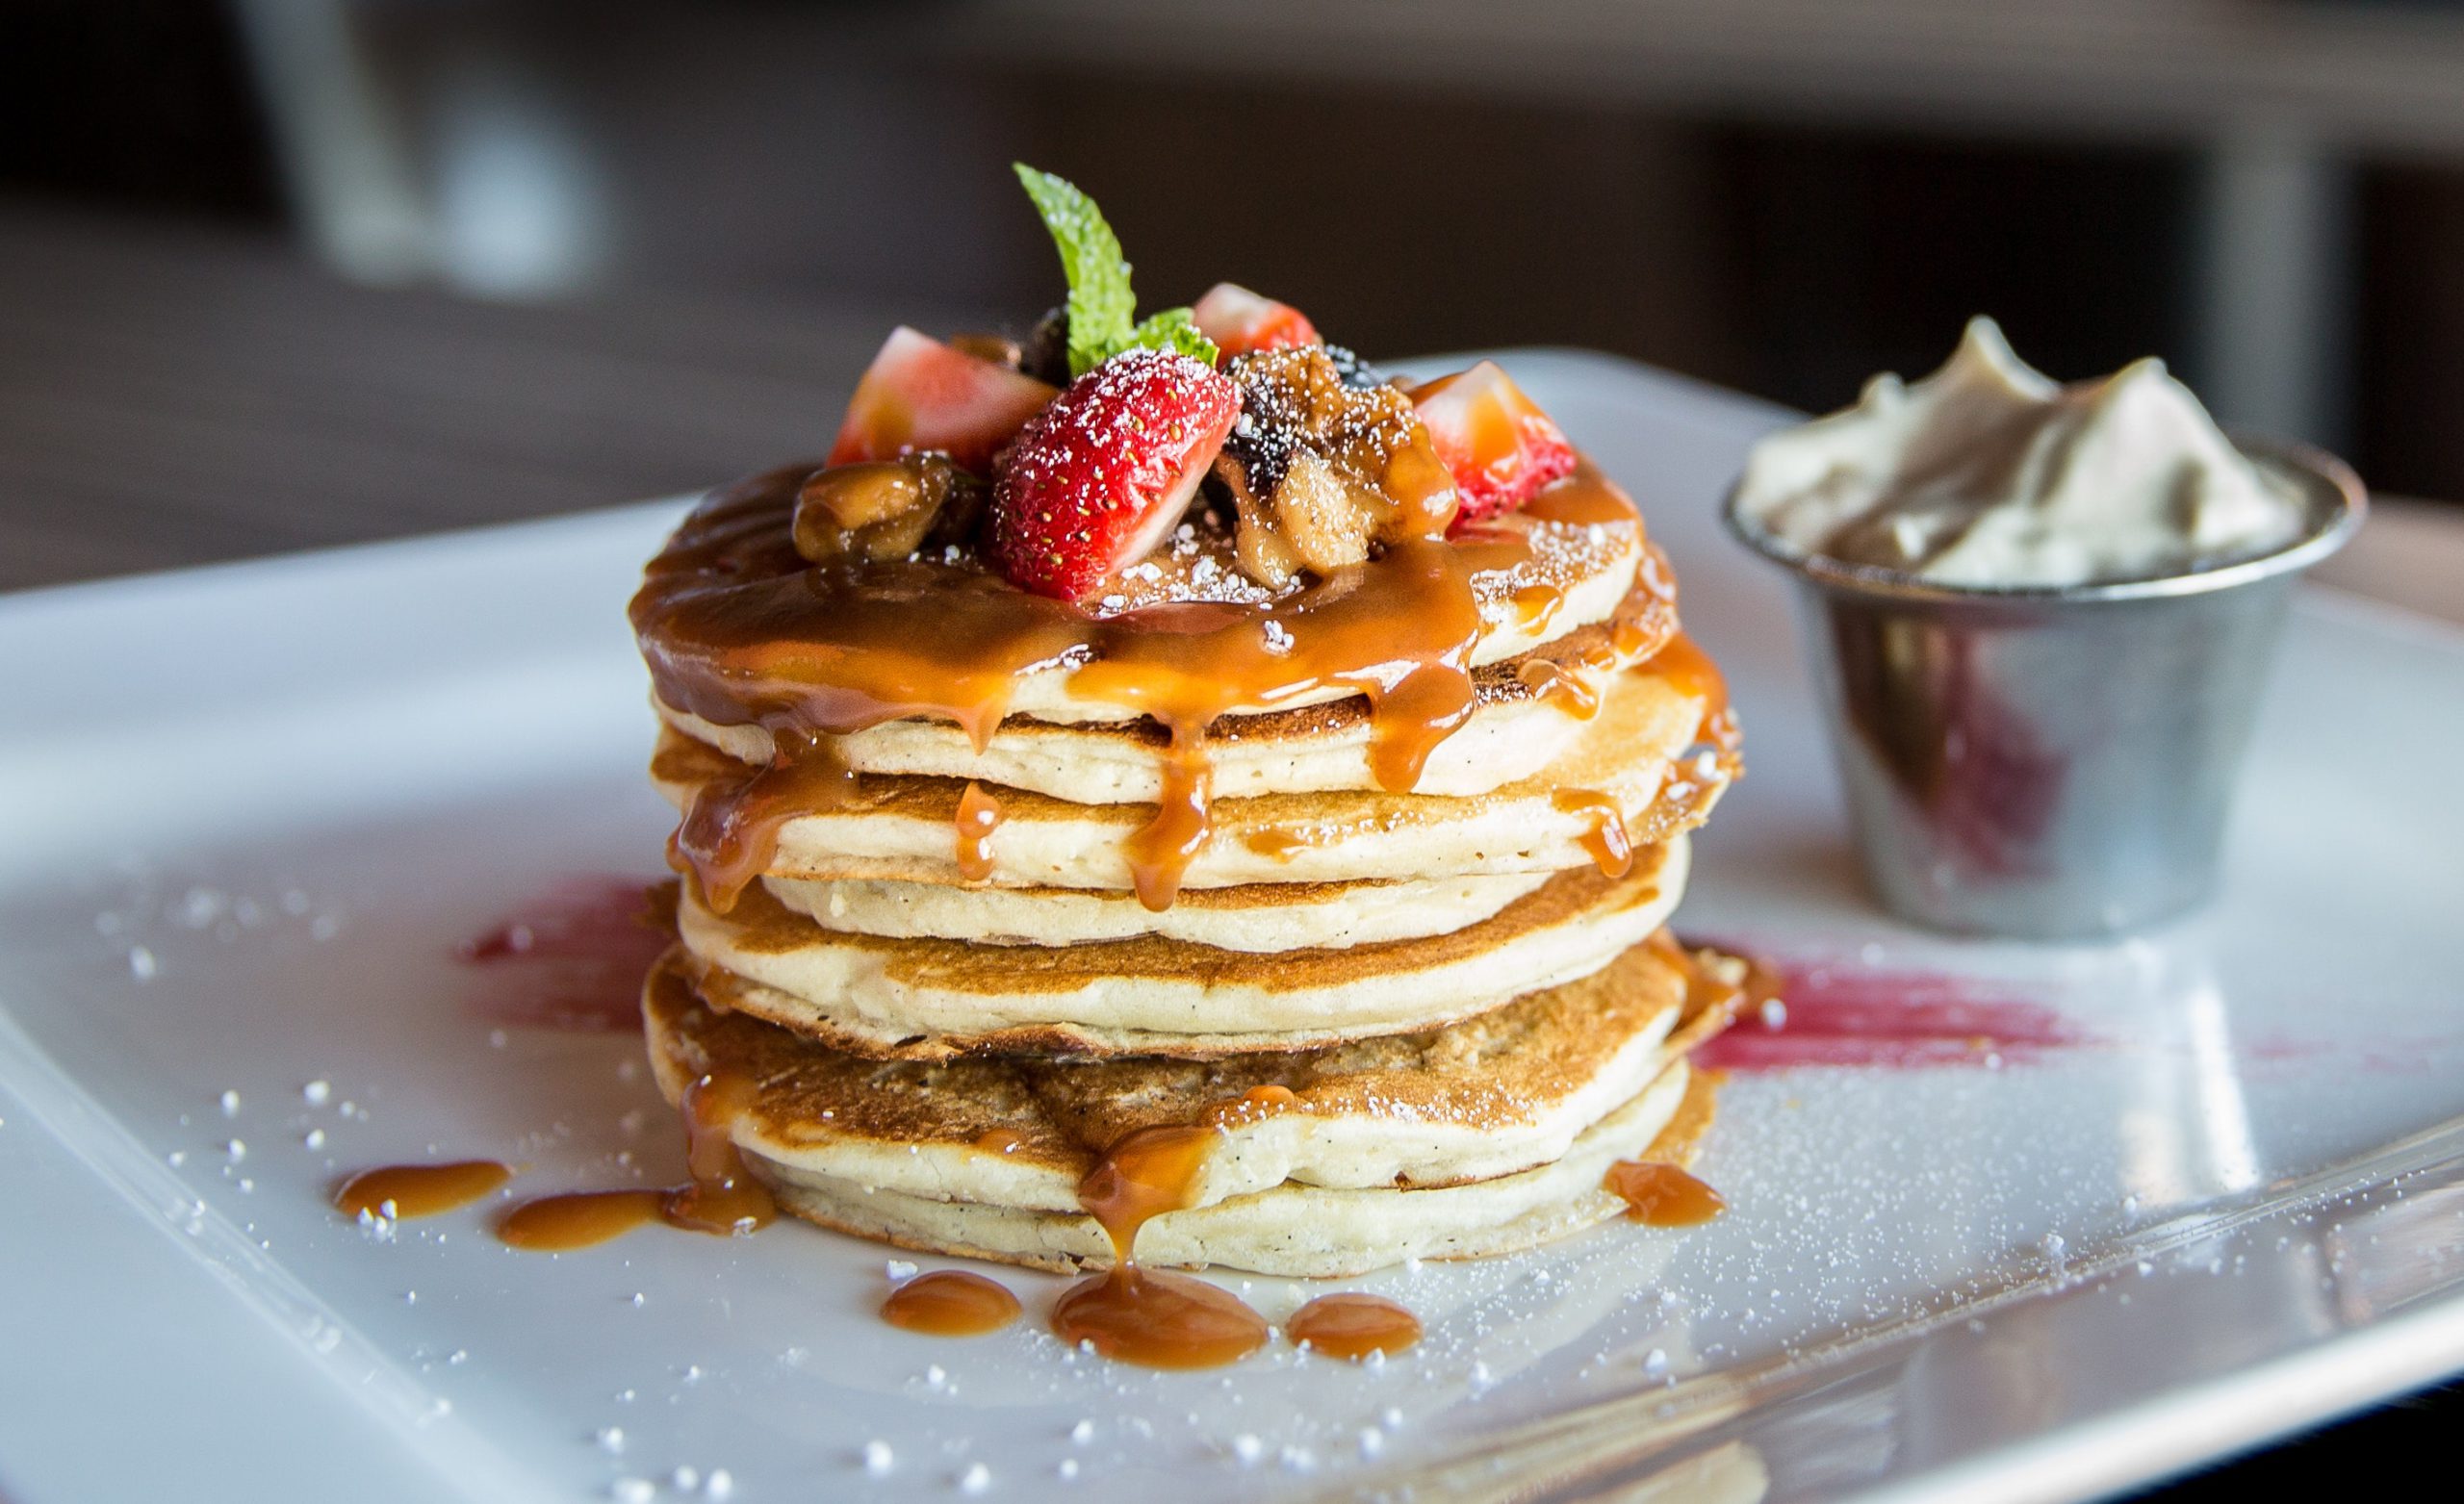 Stack of pancakes with sauce, fruit, and sugar on top with a side of whipped cream